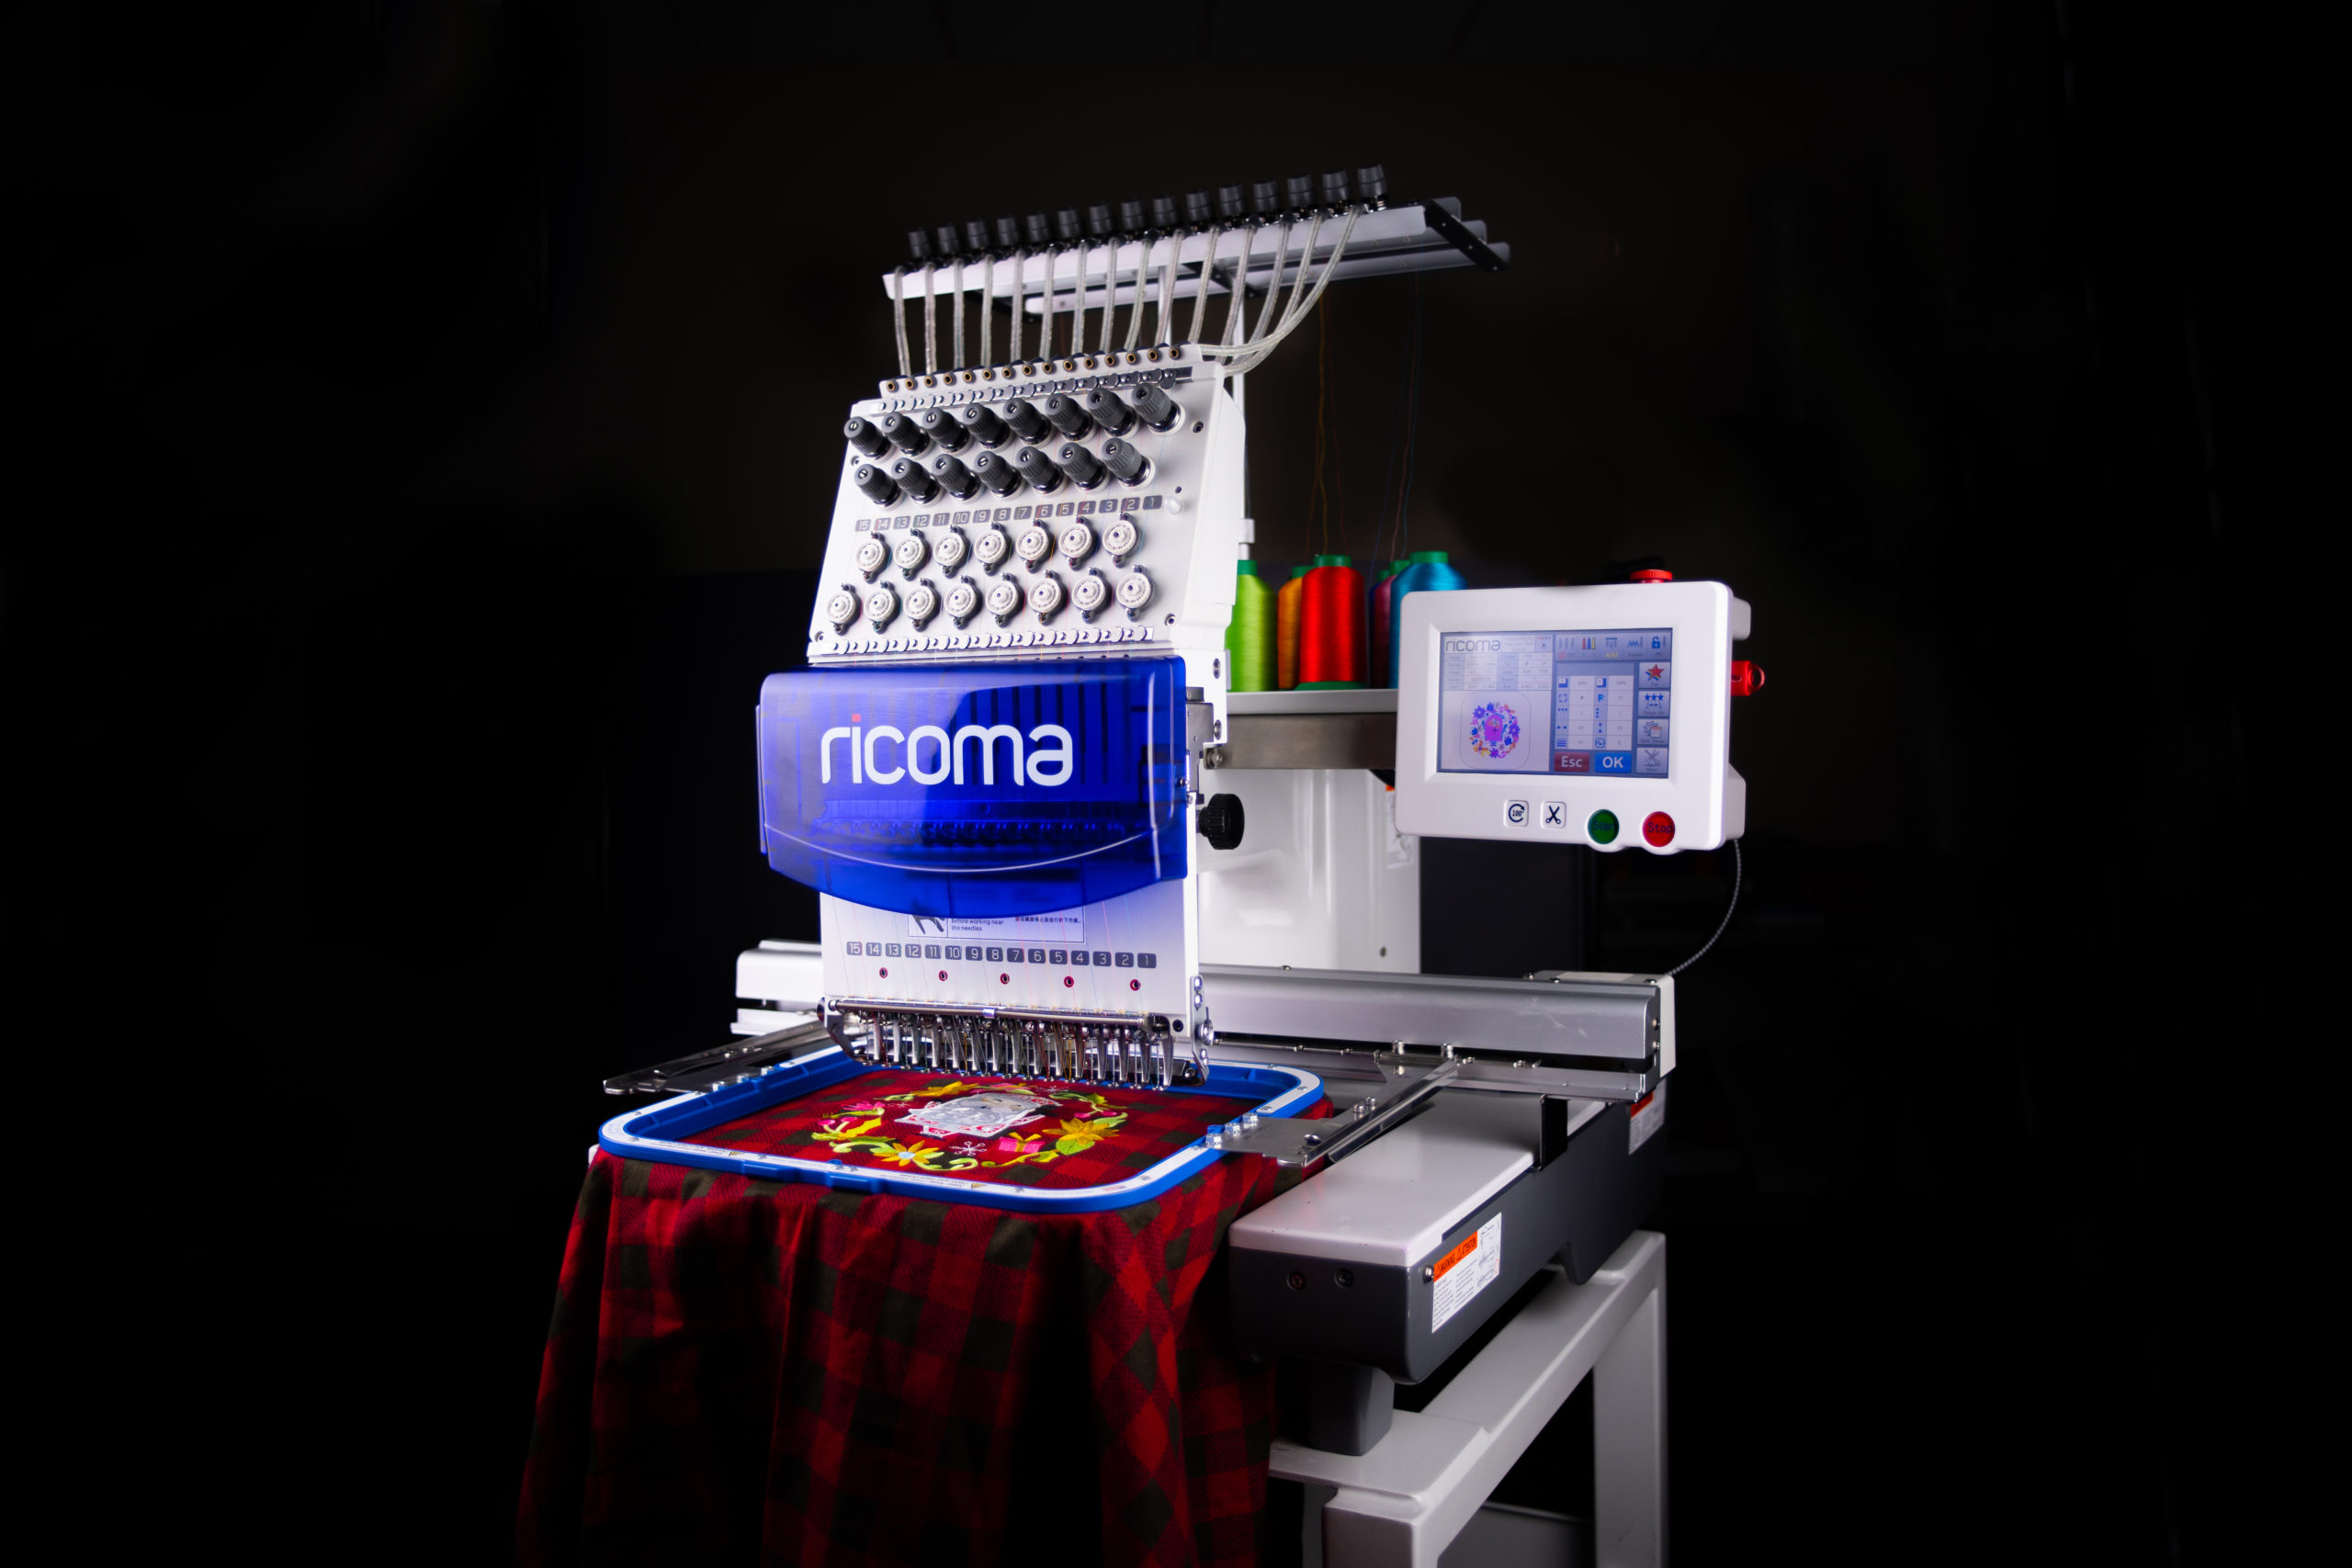 Are you looking to purchase an Ricoma 6 Head Embroidery Machine Apparel  Equipment Services Supplies ? Buy now before they go out of stock